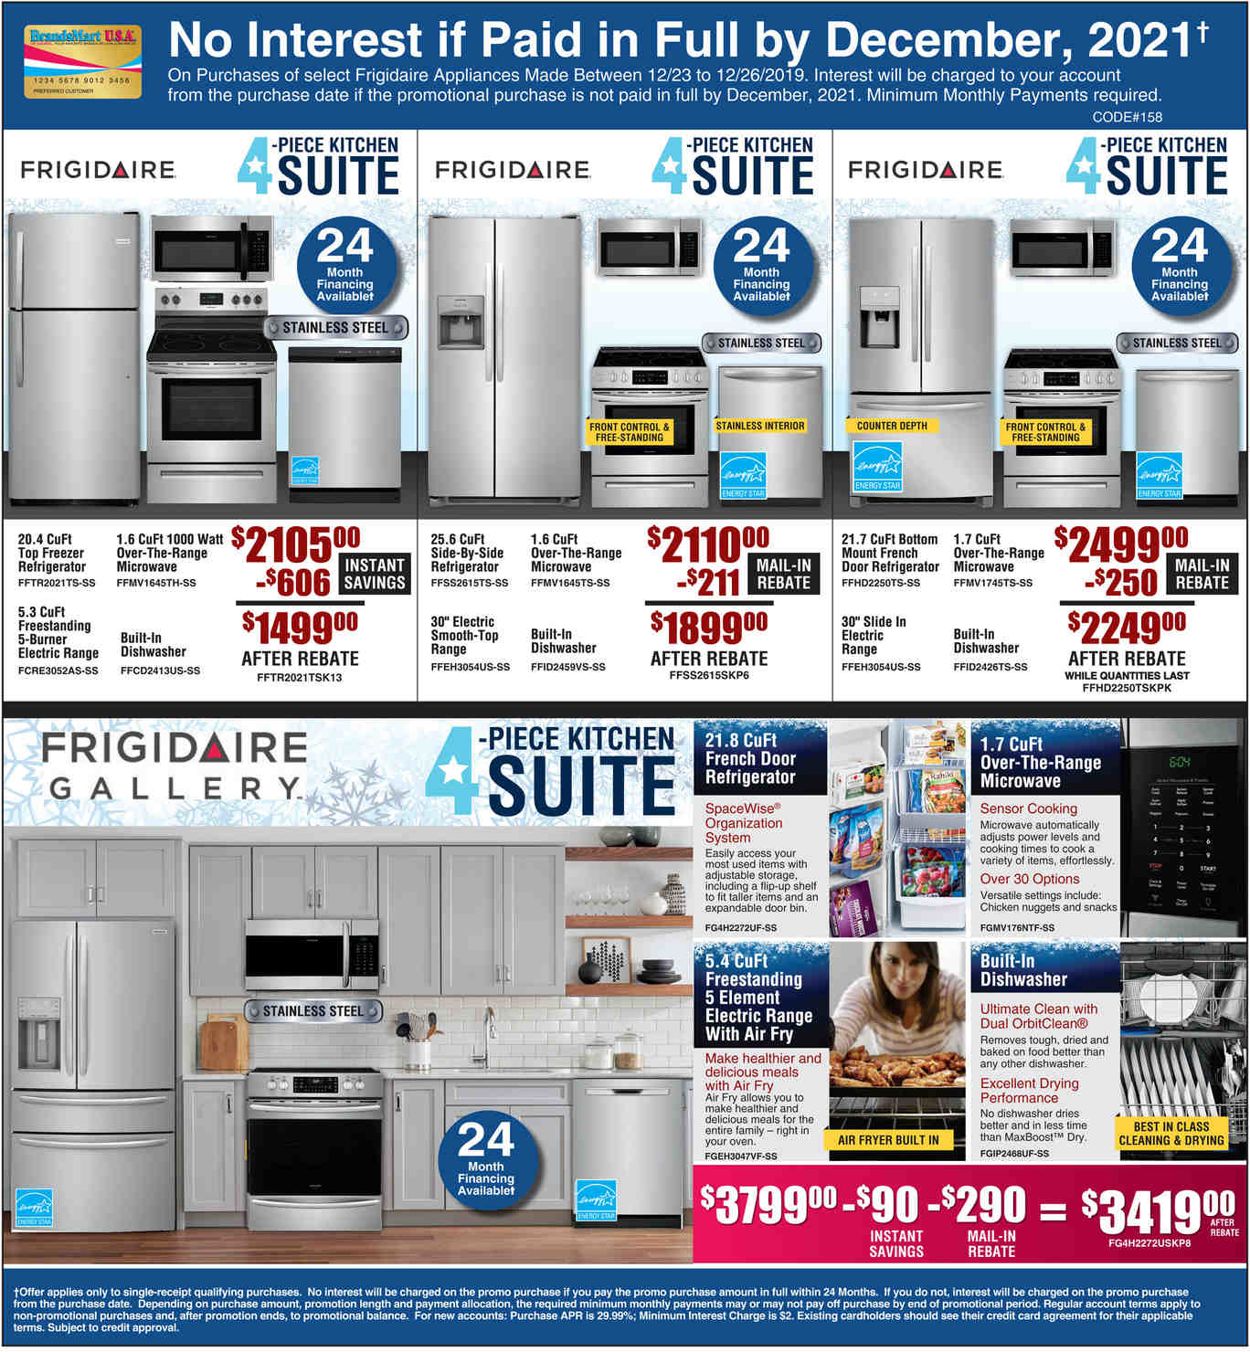 Brandsmart USA - After Christmas Clearance 2019 Weekly Ad Circular - valid 12/23-12/26/2019 (Page 14)